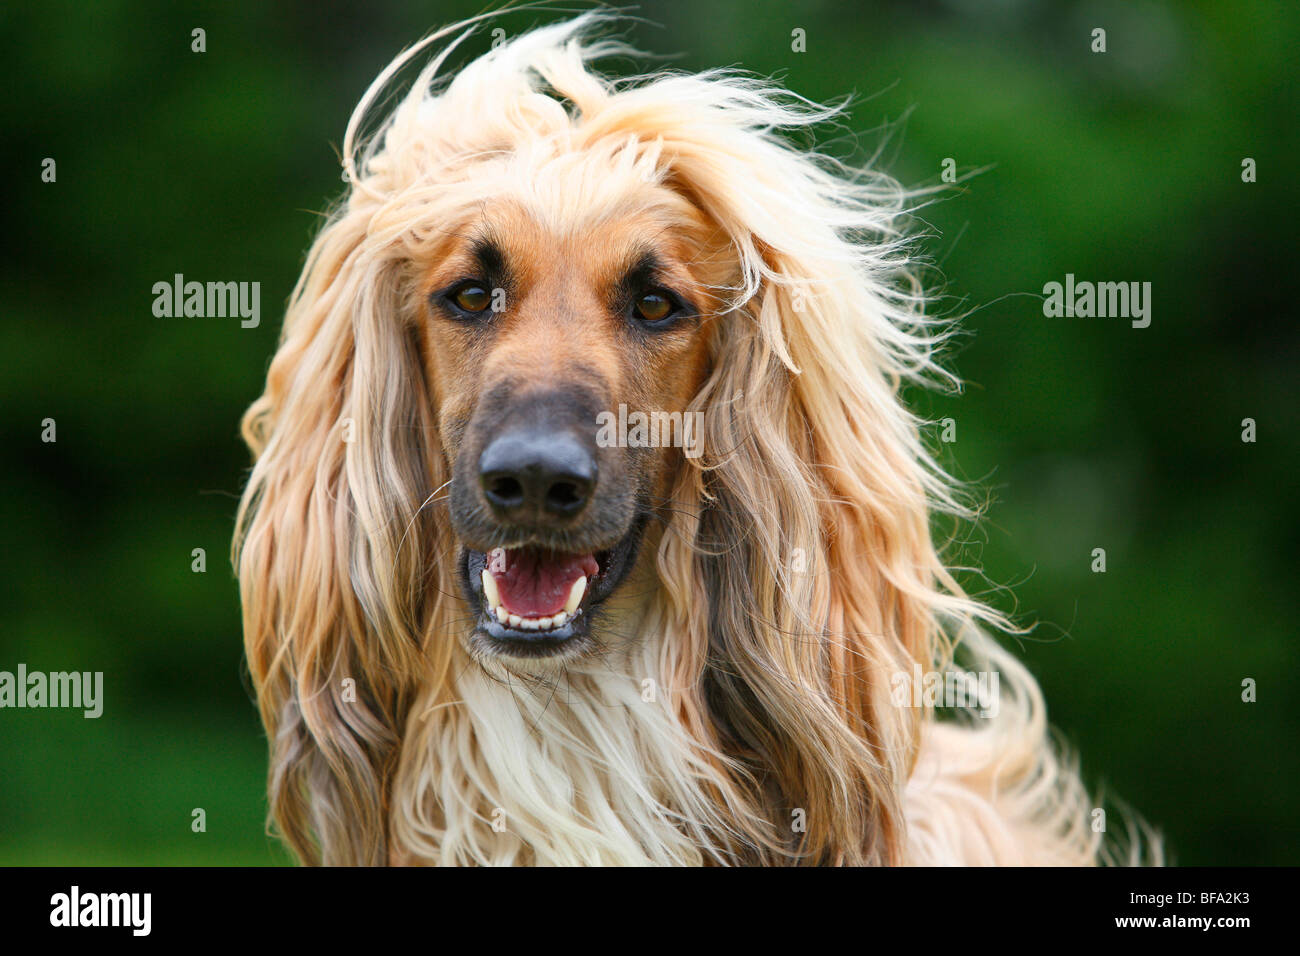 Afghanistan Hound, Afghan Hound (Canis lupus f. familiaris), outdoor portrait with waving hair Stock Photo